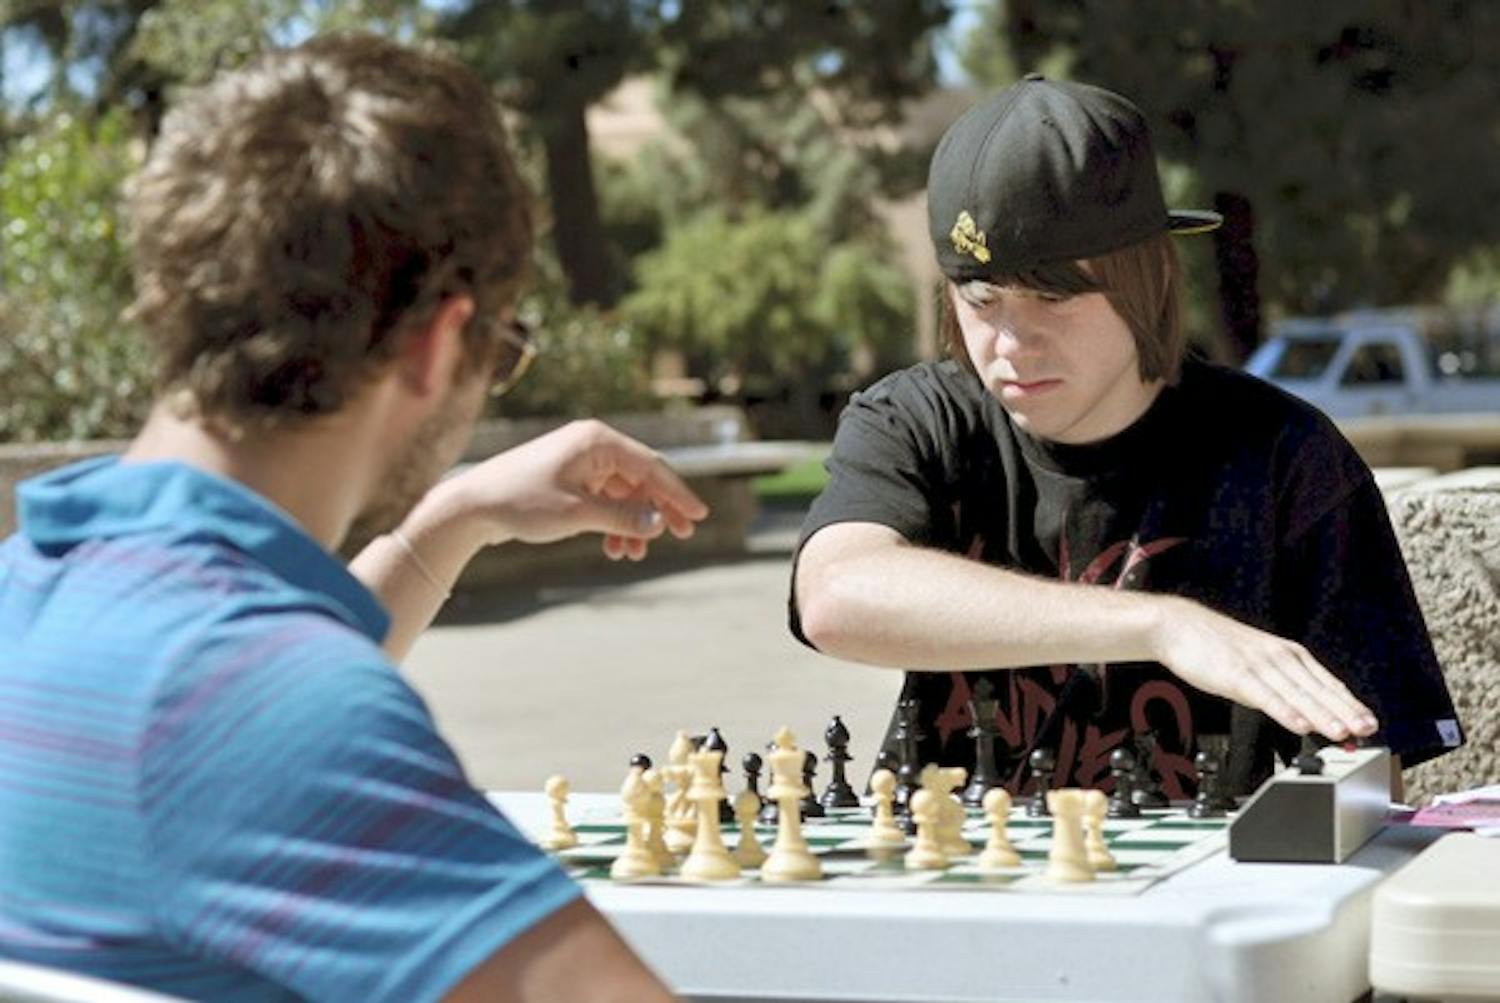 FRIENDLY MATCH: Junior Eugene Turetsky (left) and freshman Alex Scott (right), both members of the Chess Club, table outside of the MU in order to attract interest by participating in games themselves. (Photo by Sierra Smith)